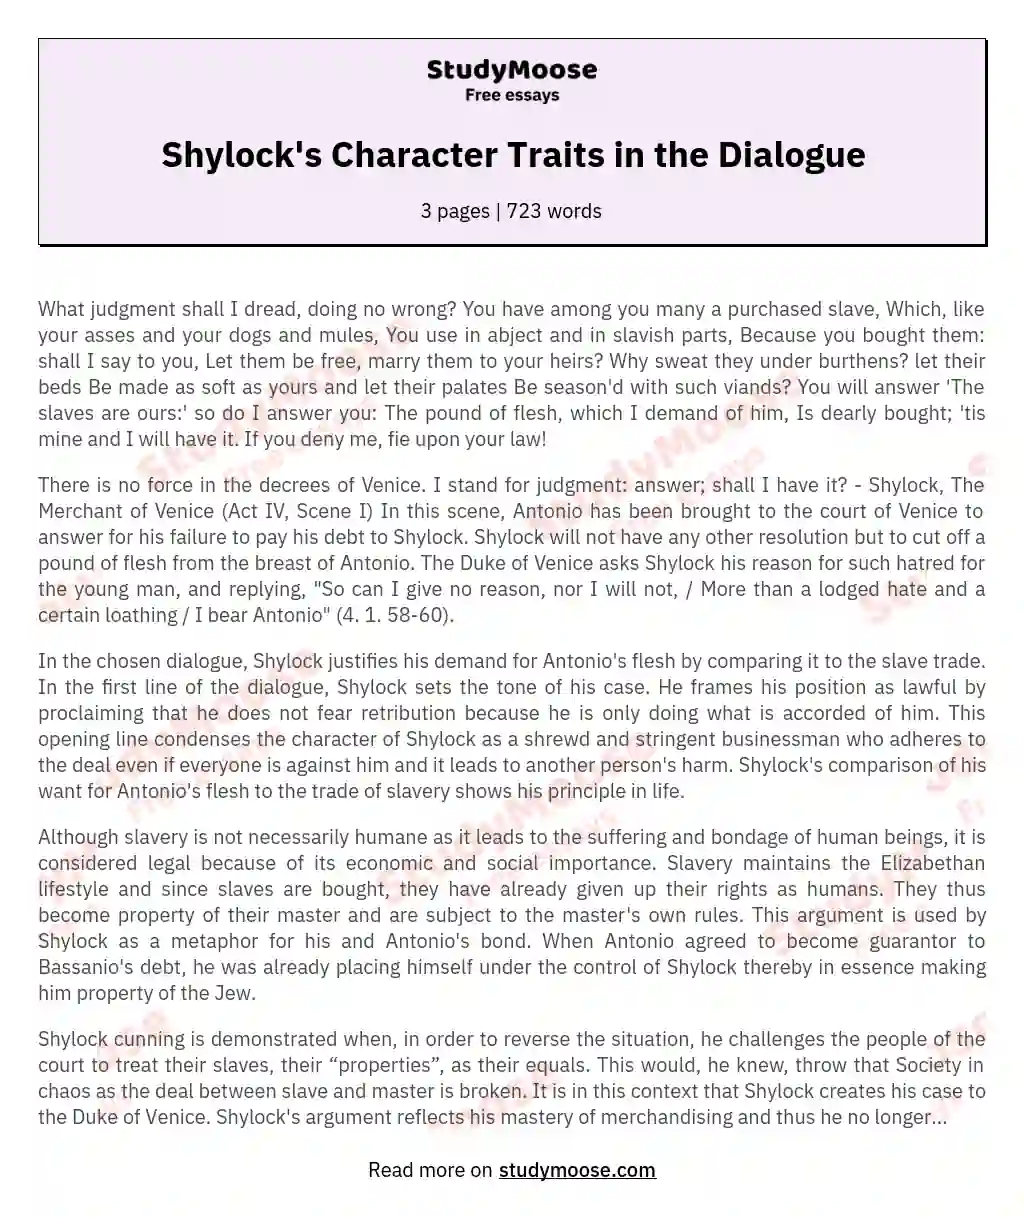 Shylock's Character Traits in the Dialogue